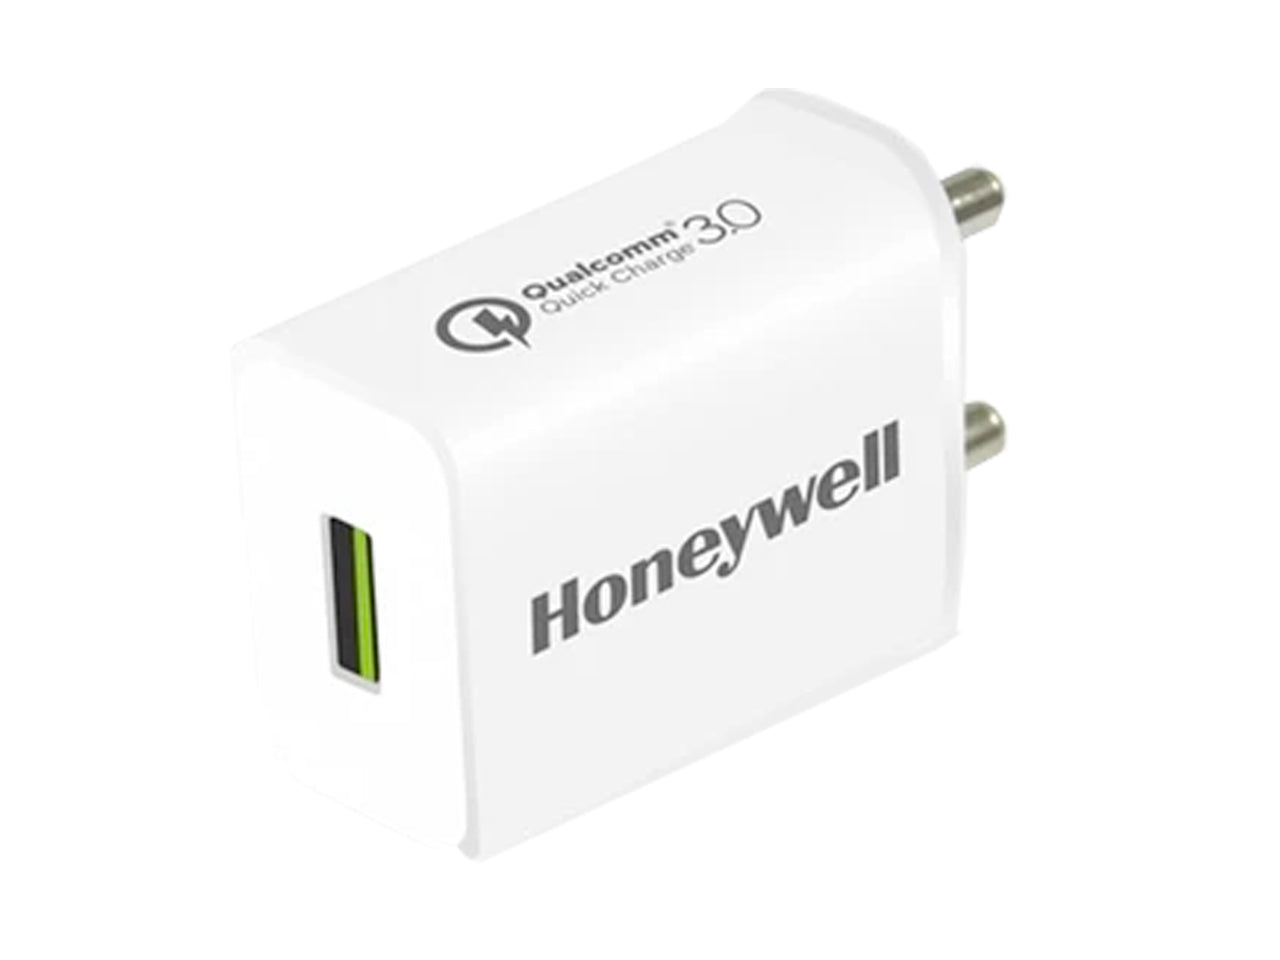 Honeywell Zest Charger Quick Charger 3.0